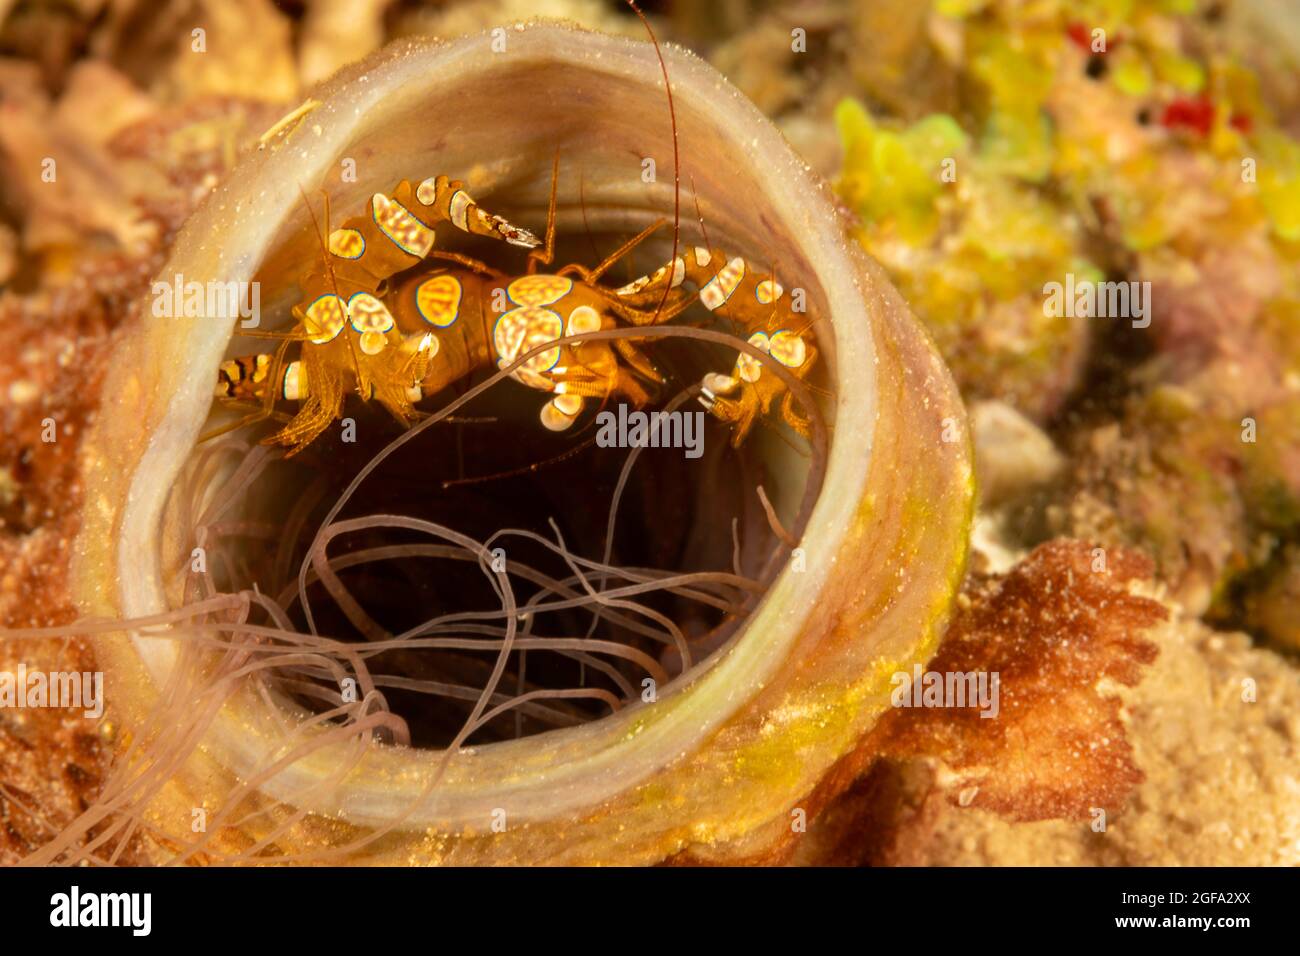 These three squat anemone shrimp, Thor amboinensis, normally live at the base of this tube anemone which has retreated down it self made chimney, Phil Stock Photo